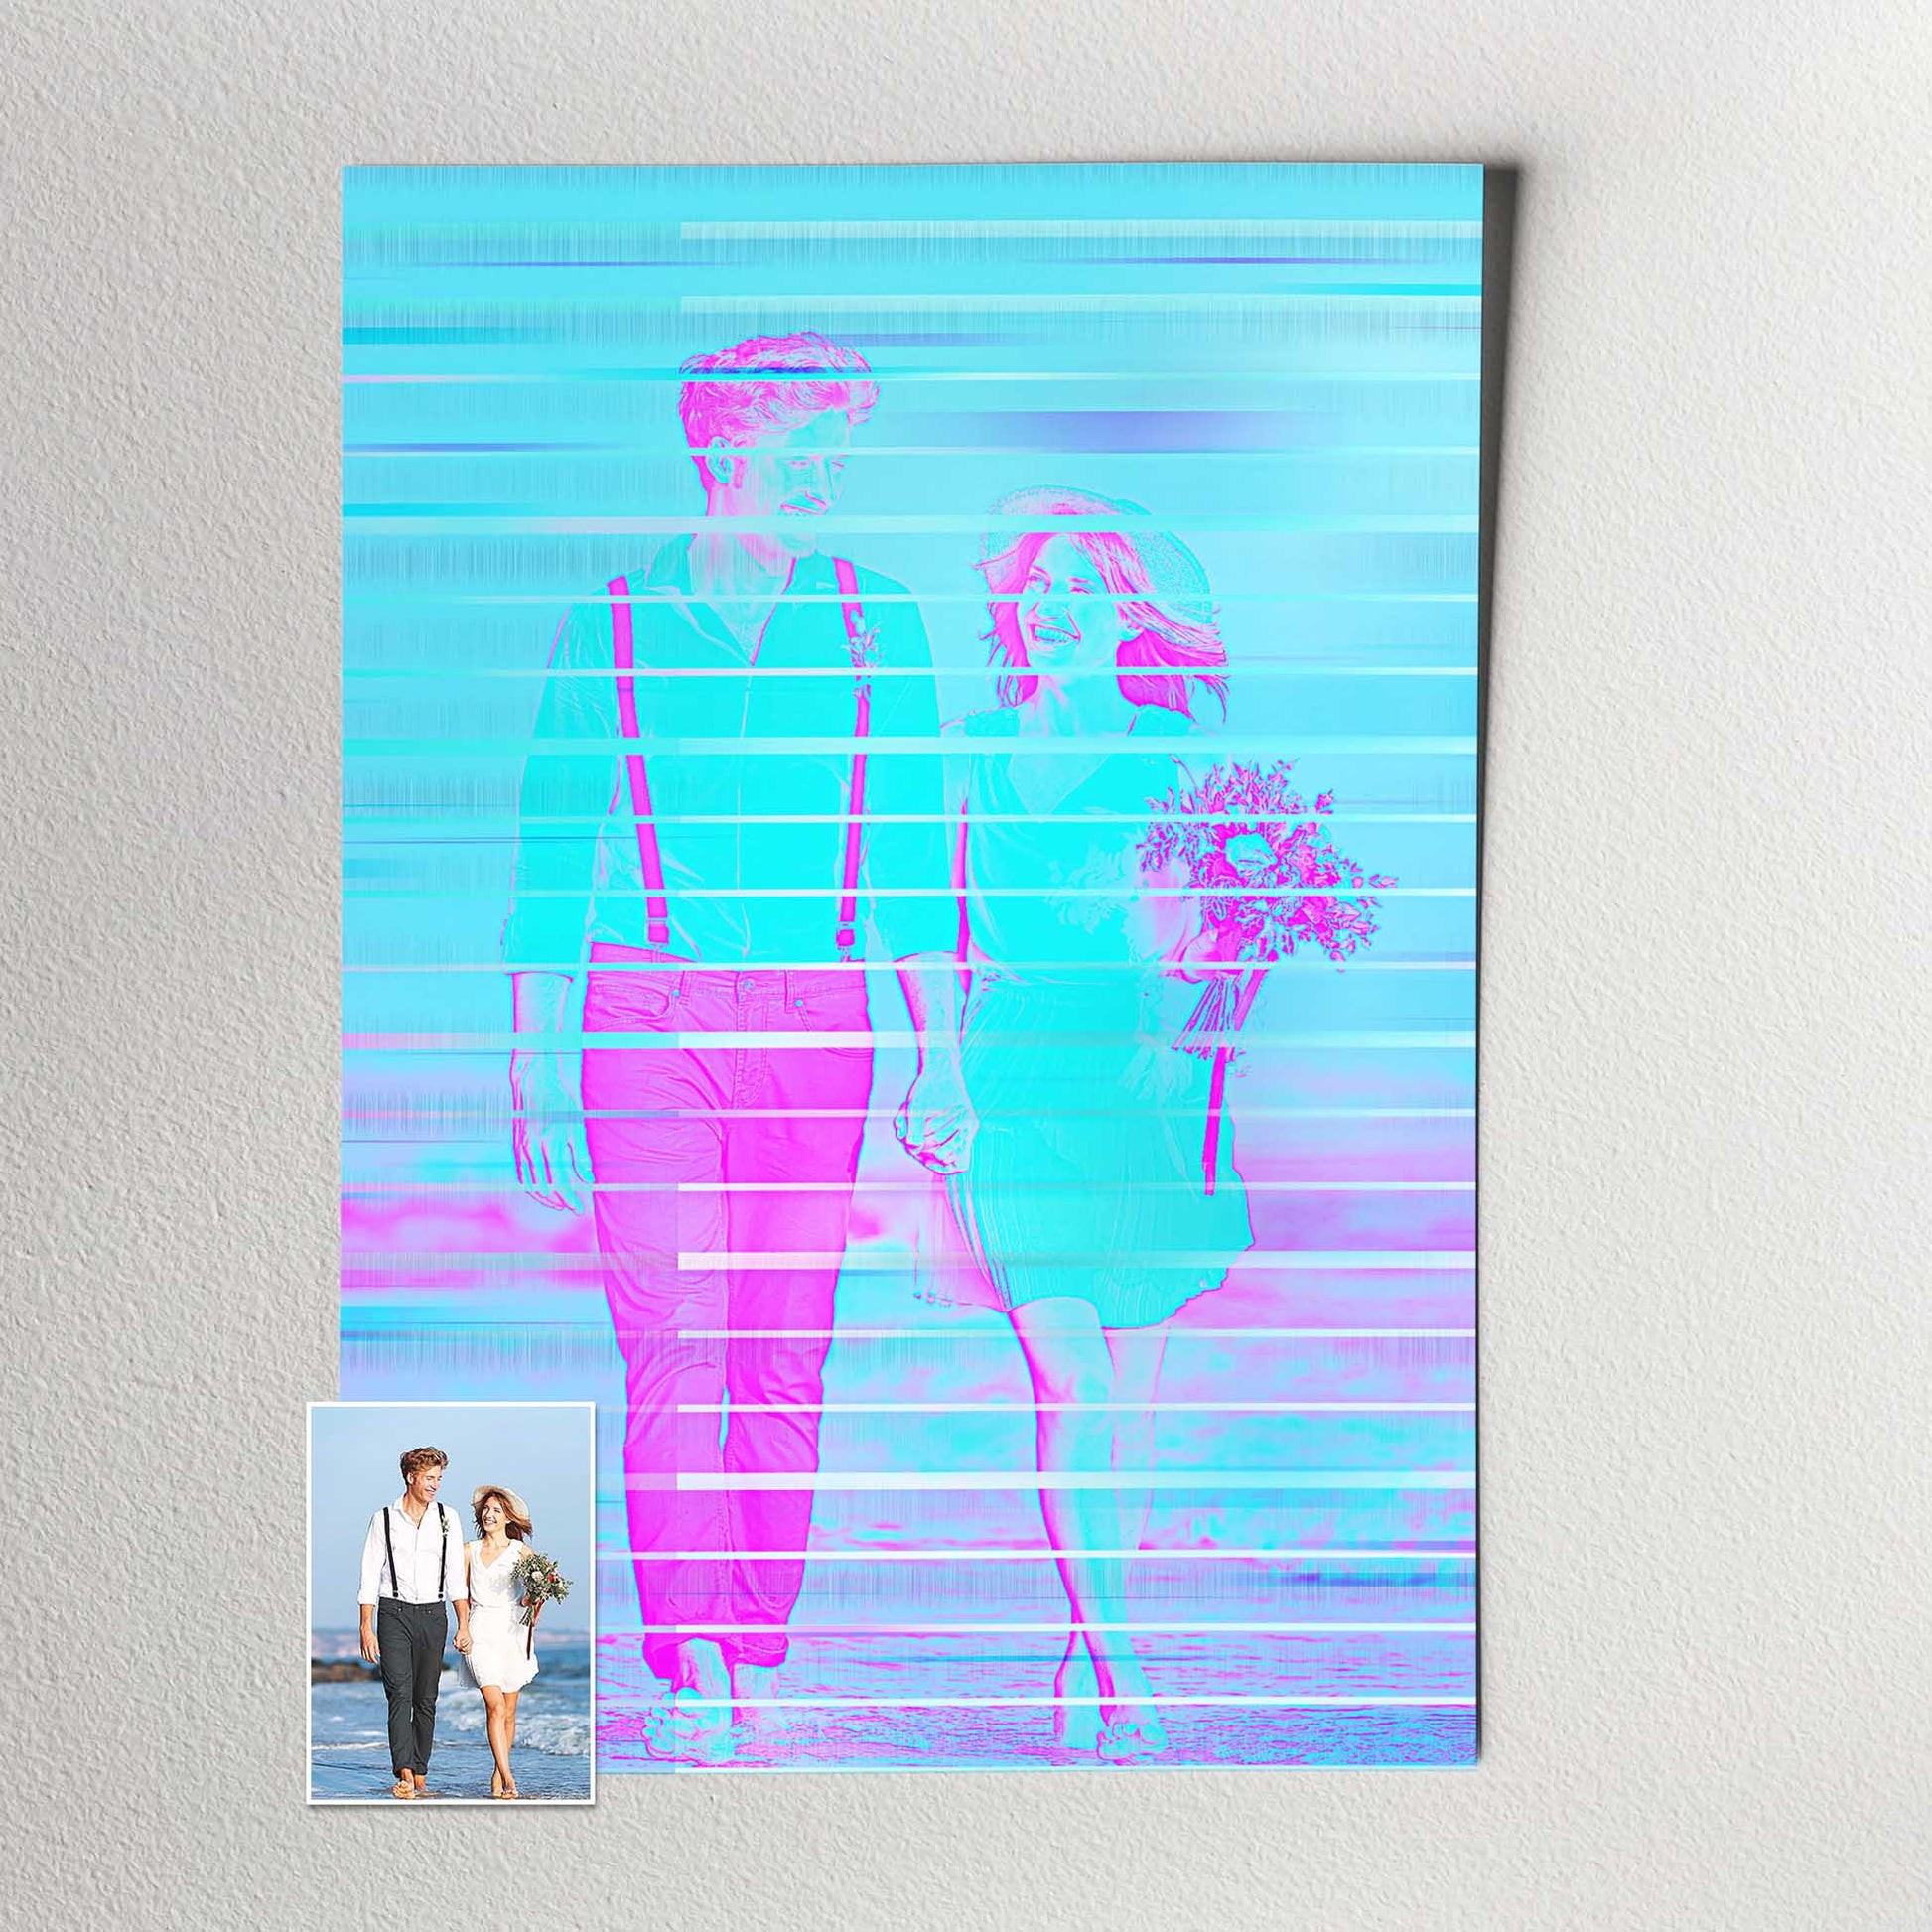 Home & Office Decor Accessory: Add a touch of artistic flair to your living or workspace with this personalized print. Its modern design and captivating colors make it an ideal decor accessory